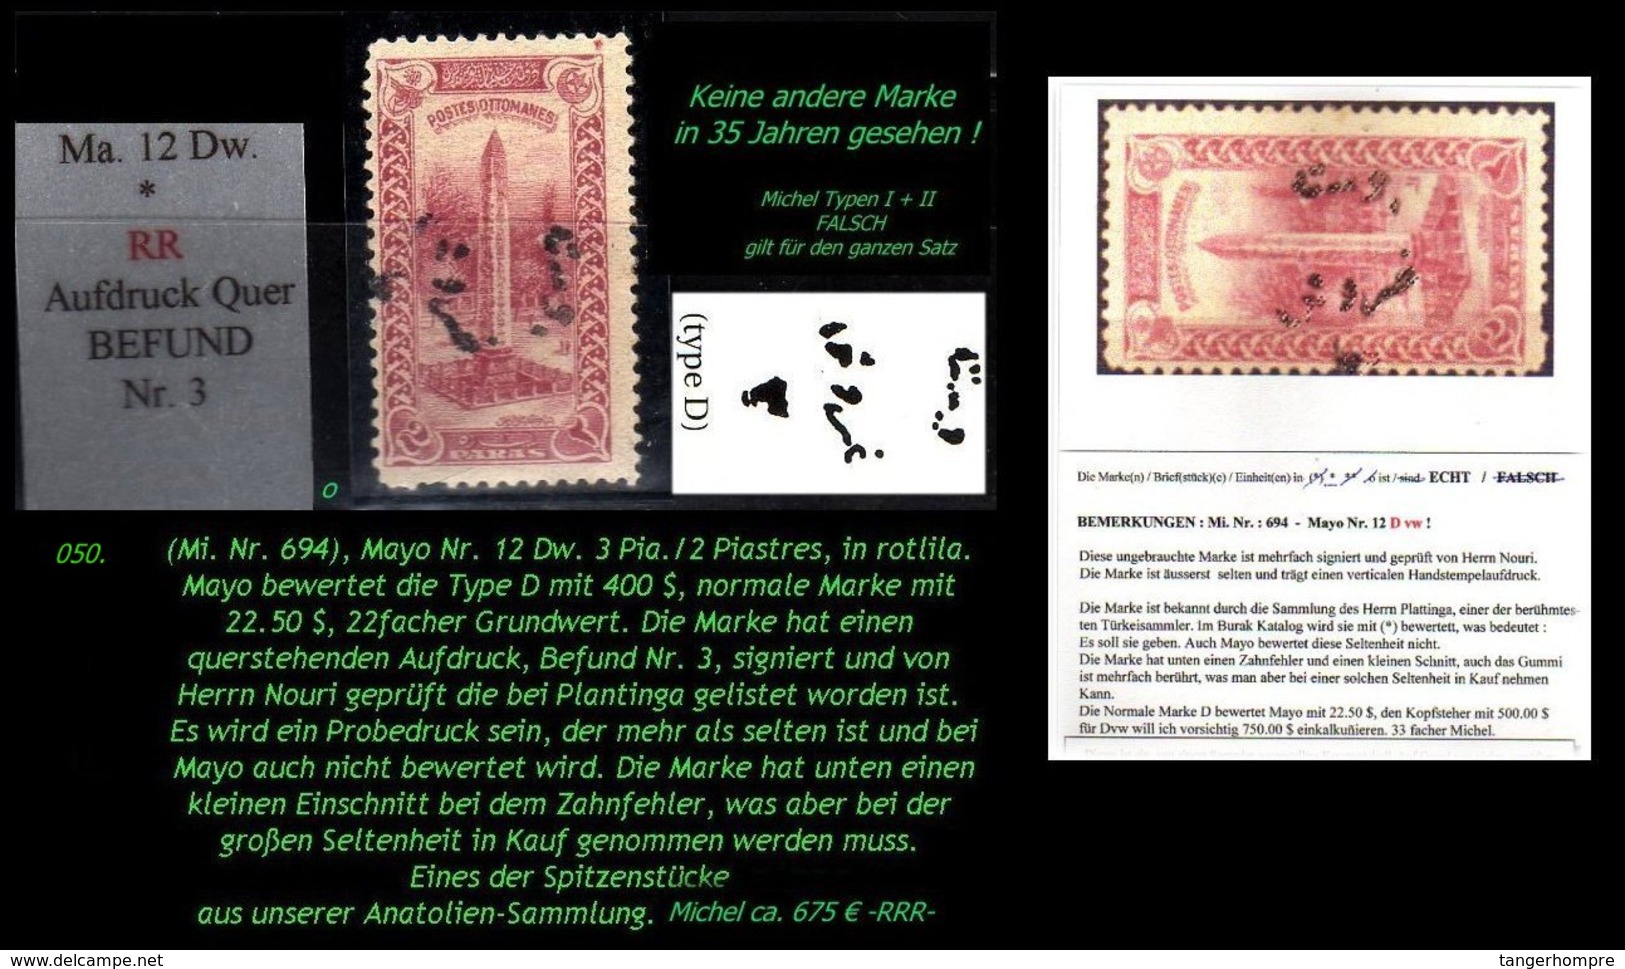 EARLY OTTOMAN SPECIALIZED FOR SPECIALIST, SEE...Mi. Nr. 694 - Mayo Nr. 12 D W - Aufdruck QUER !!! -RRR- - 1920-21 Kleinasien